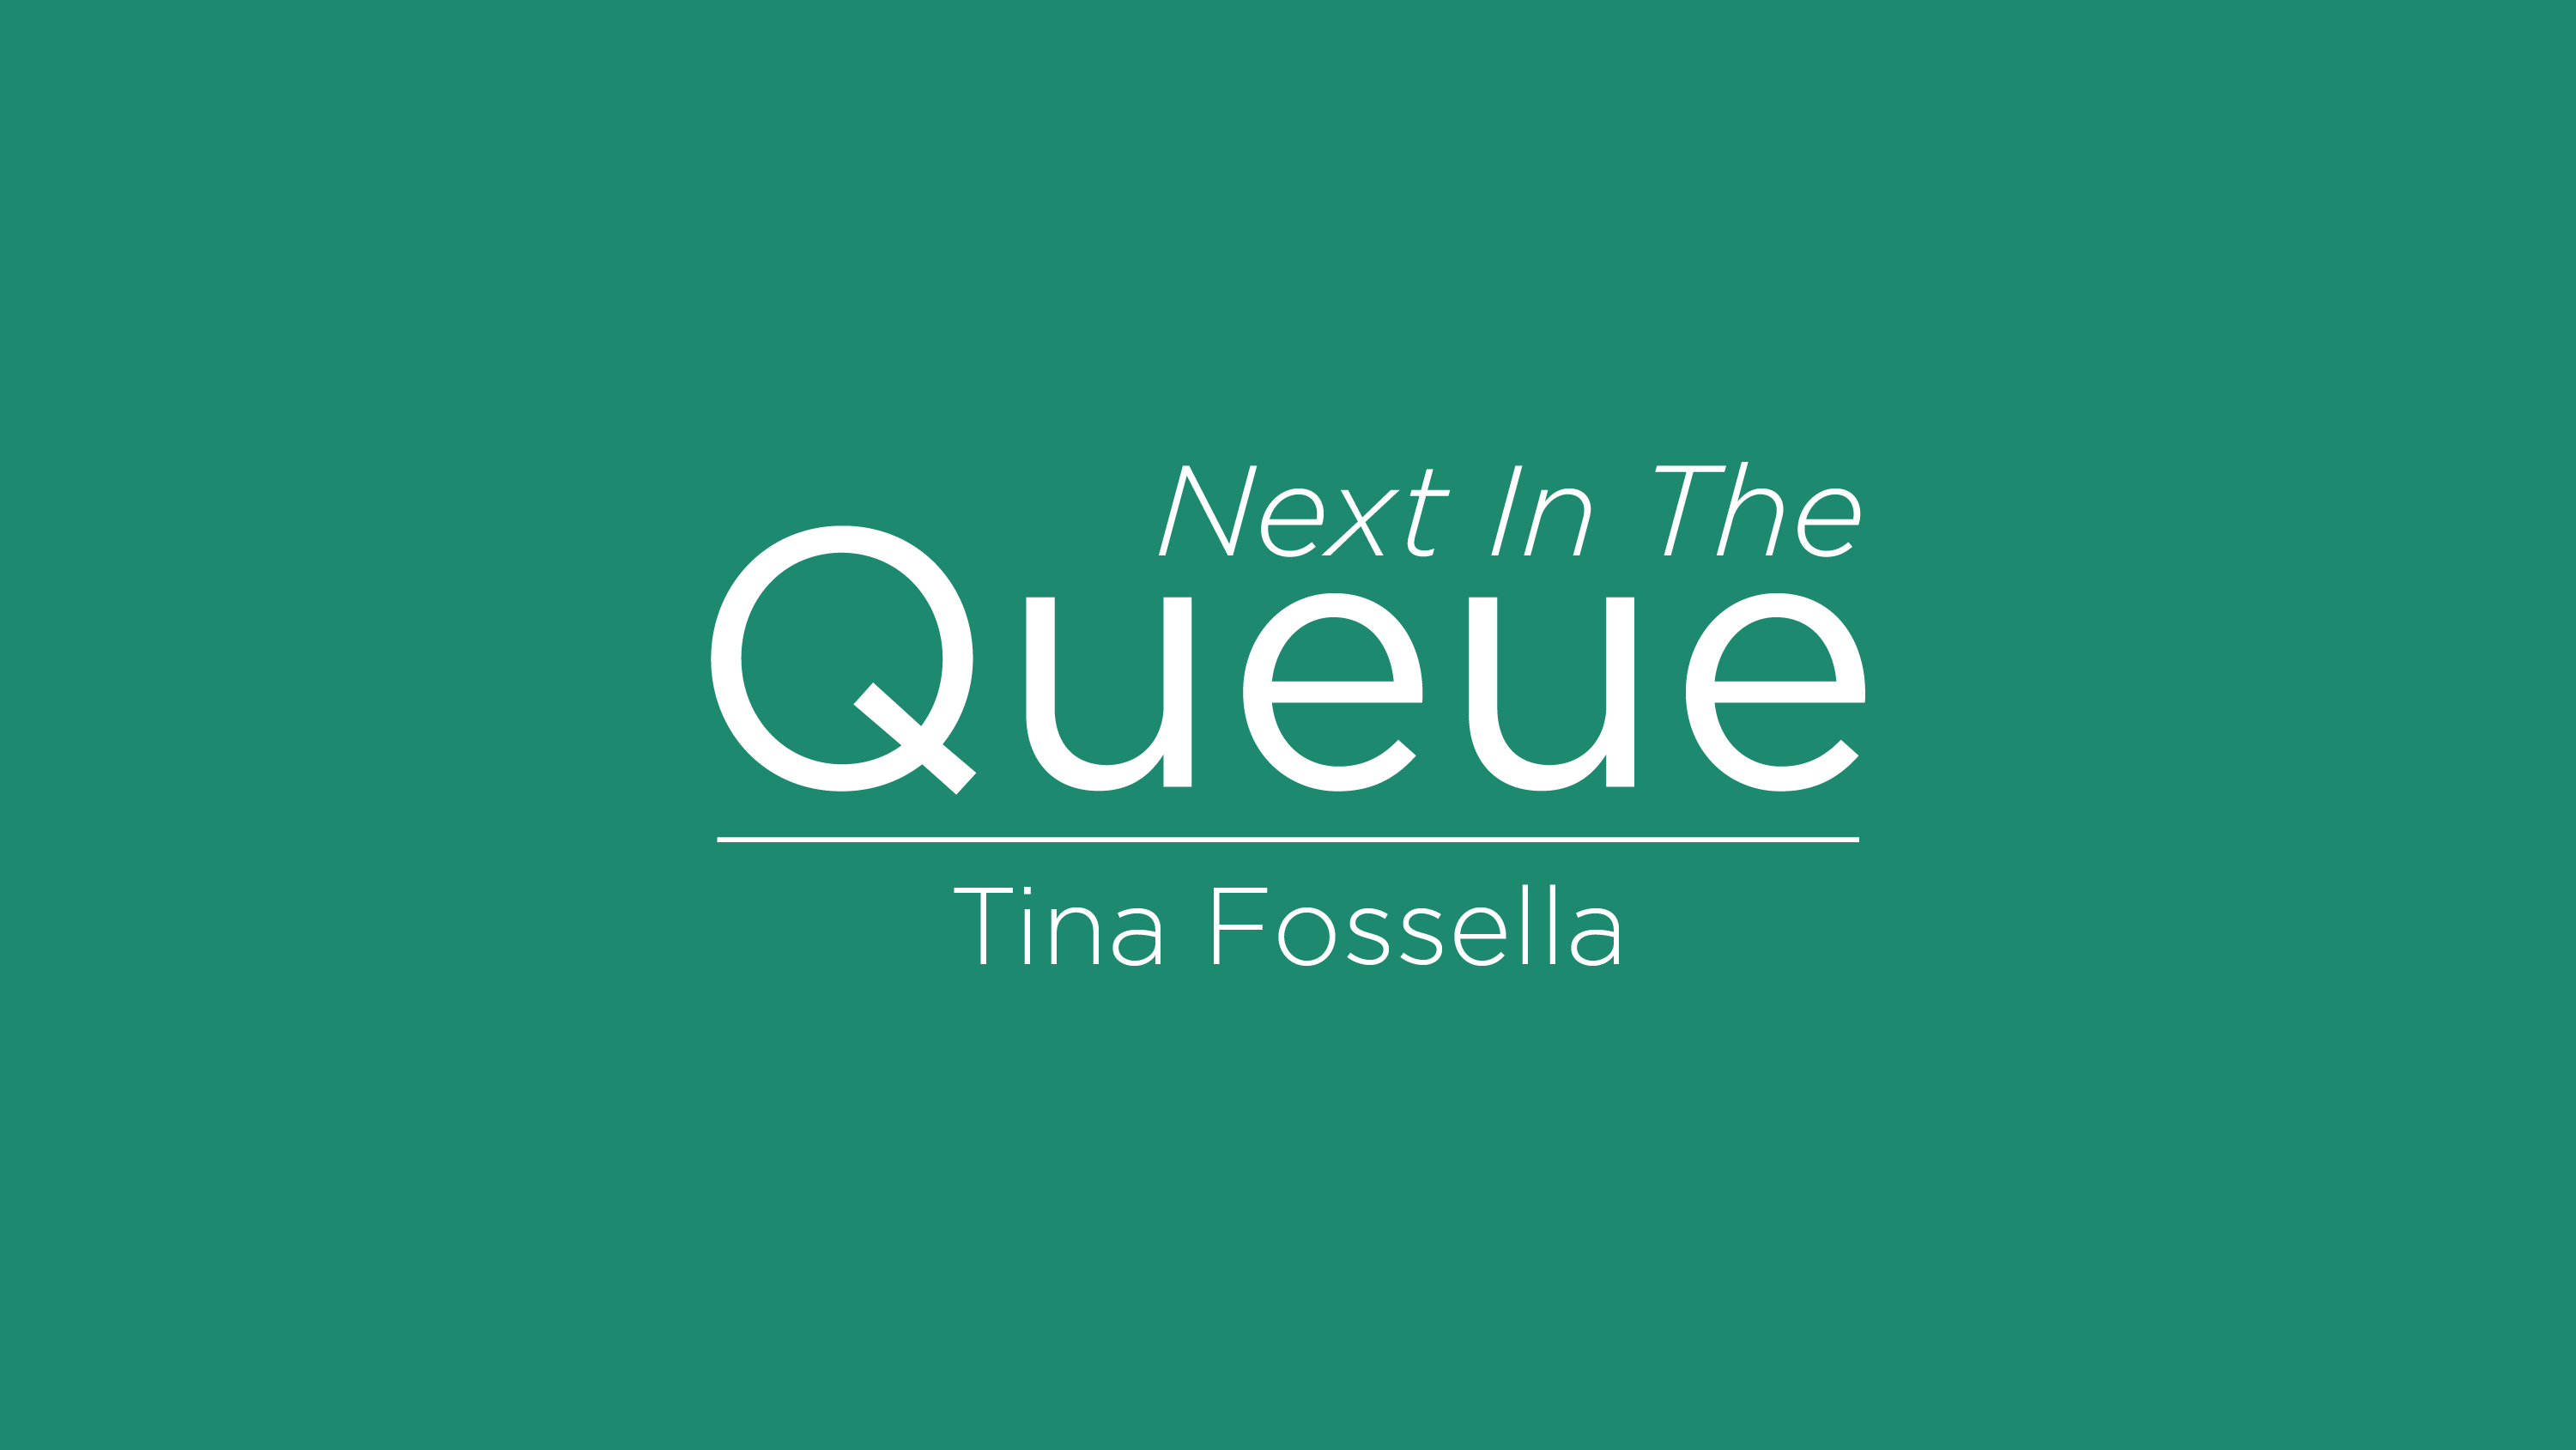 blog post cover graphic for The Queue featuring tina fossella